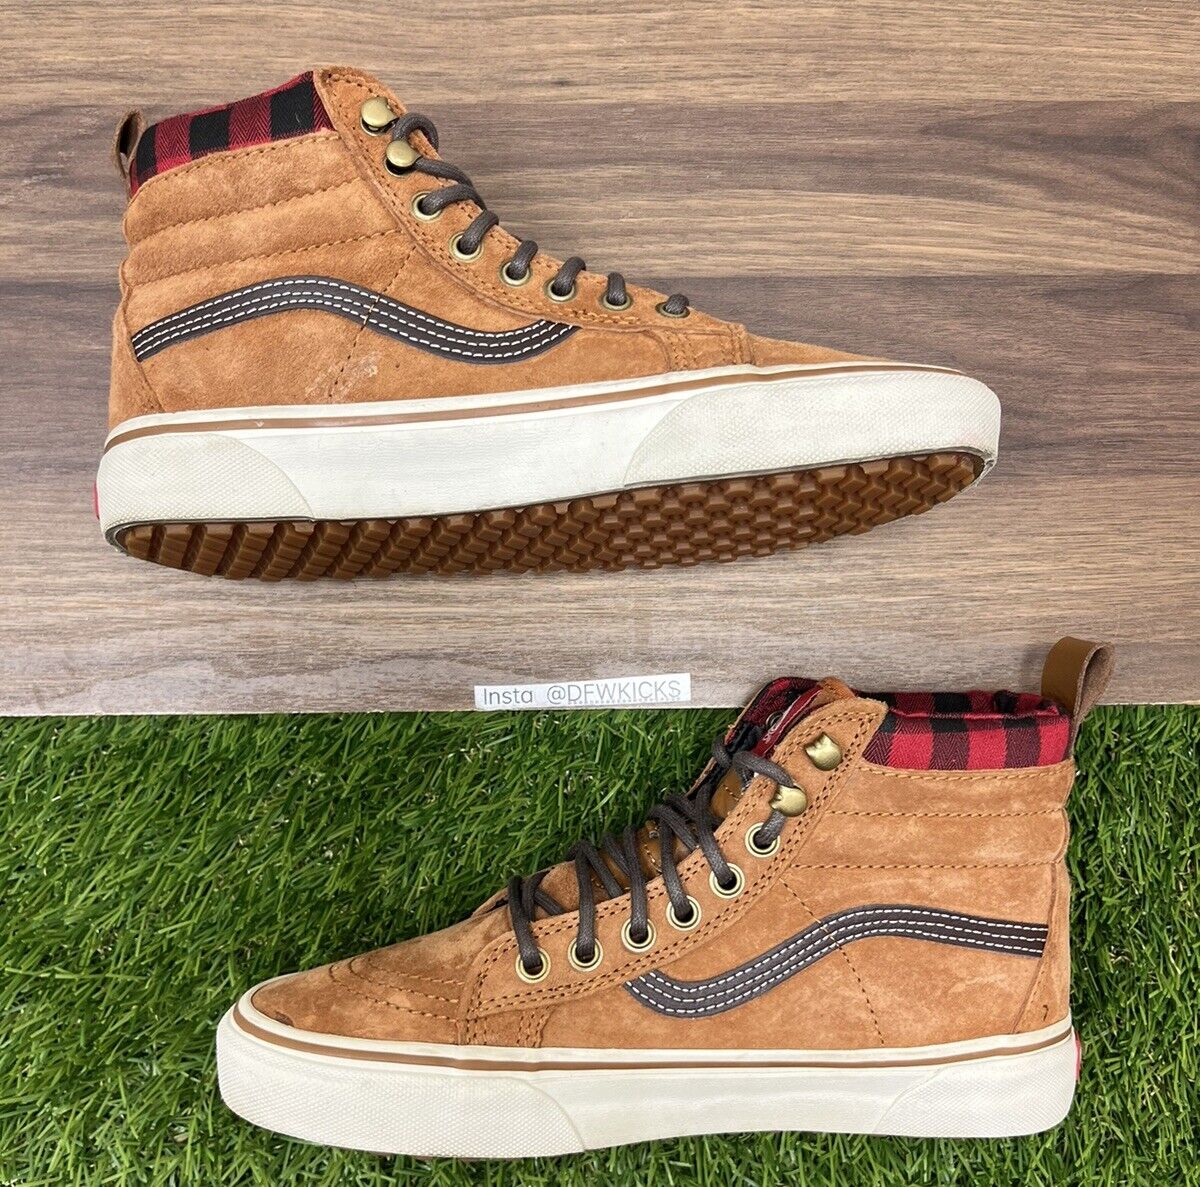 Vans SK8 Hi Scotchgard Womens Size 8 High Top 721454 Brown Flannel Lined Shoes